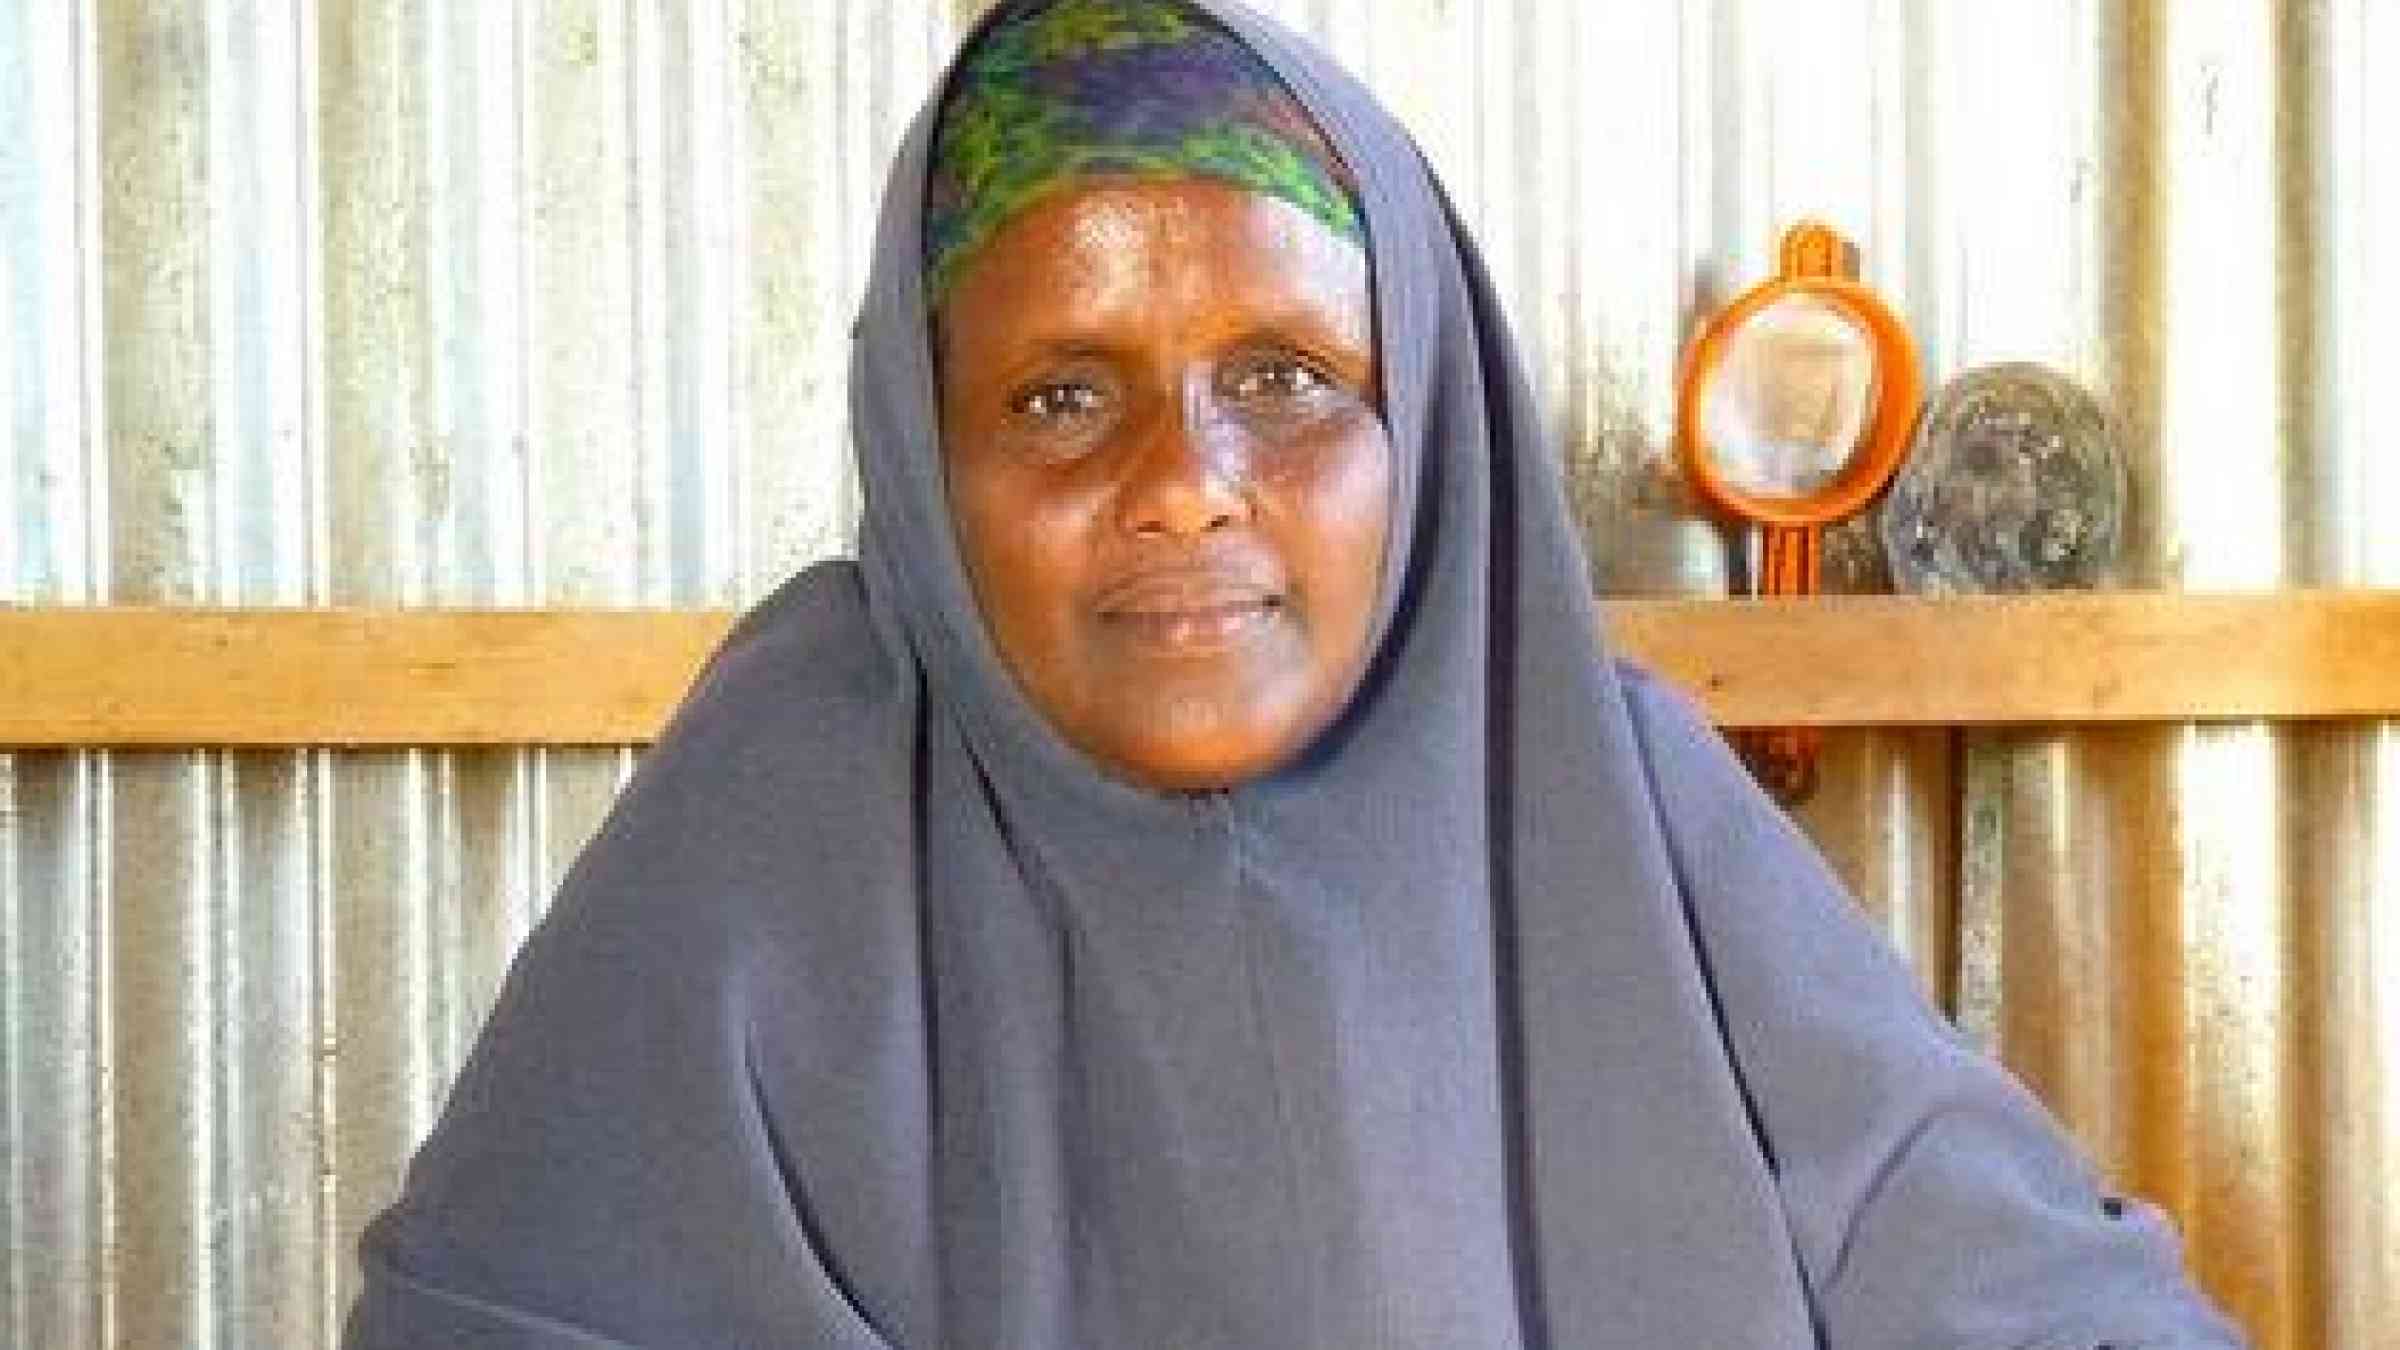 <b>Resilient people: </b>Dealing with disasters has long been a way of life for herders in Puntland, Somalia. Fauzia lost all her livestock in the 2004 Tsunami in her seaside village. She subsequently moved to a camp for displaced people where she ekes out a living by buying and selling milk and meat.